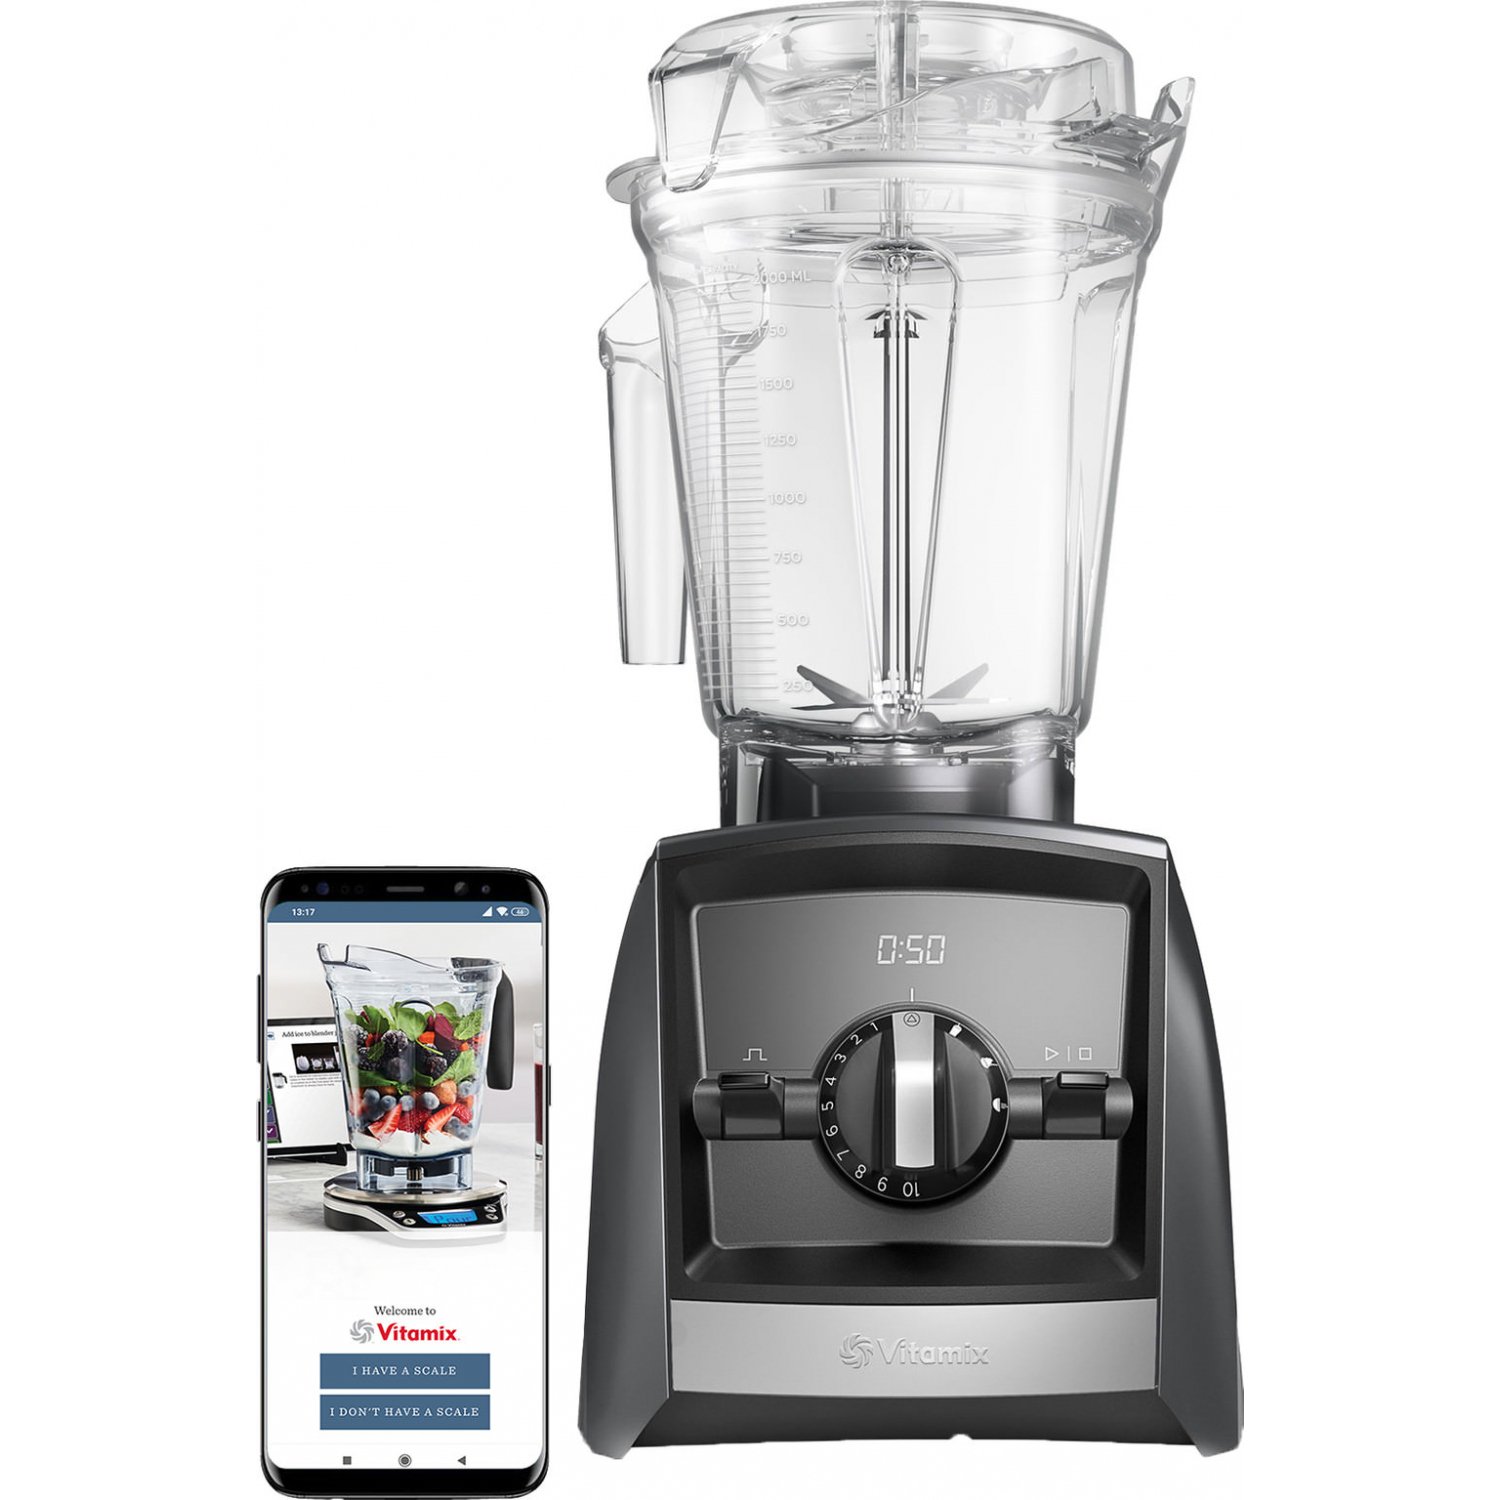 Wartmann Blender - All-round high-speed blender available in various colors!